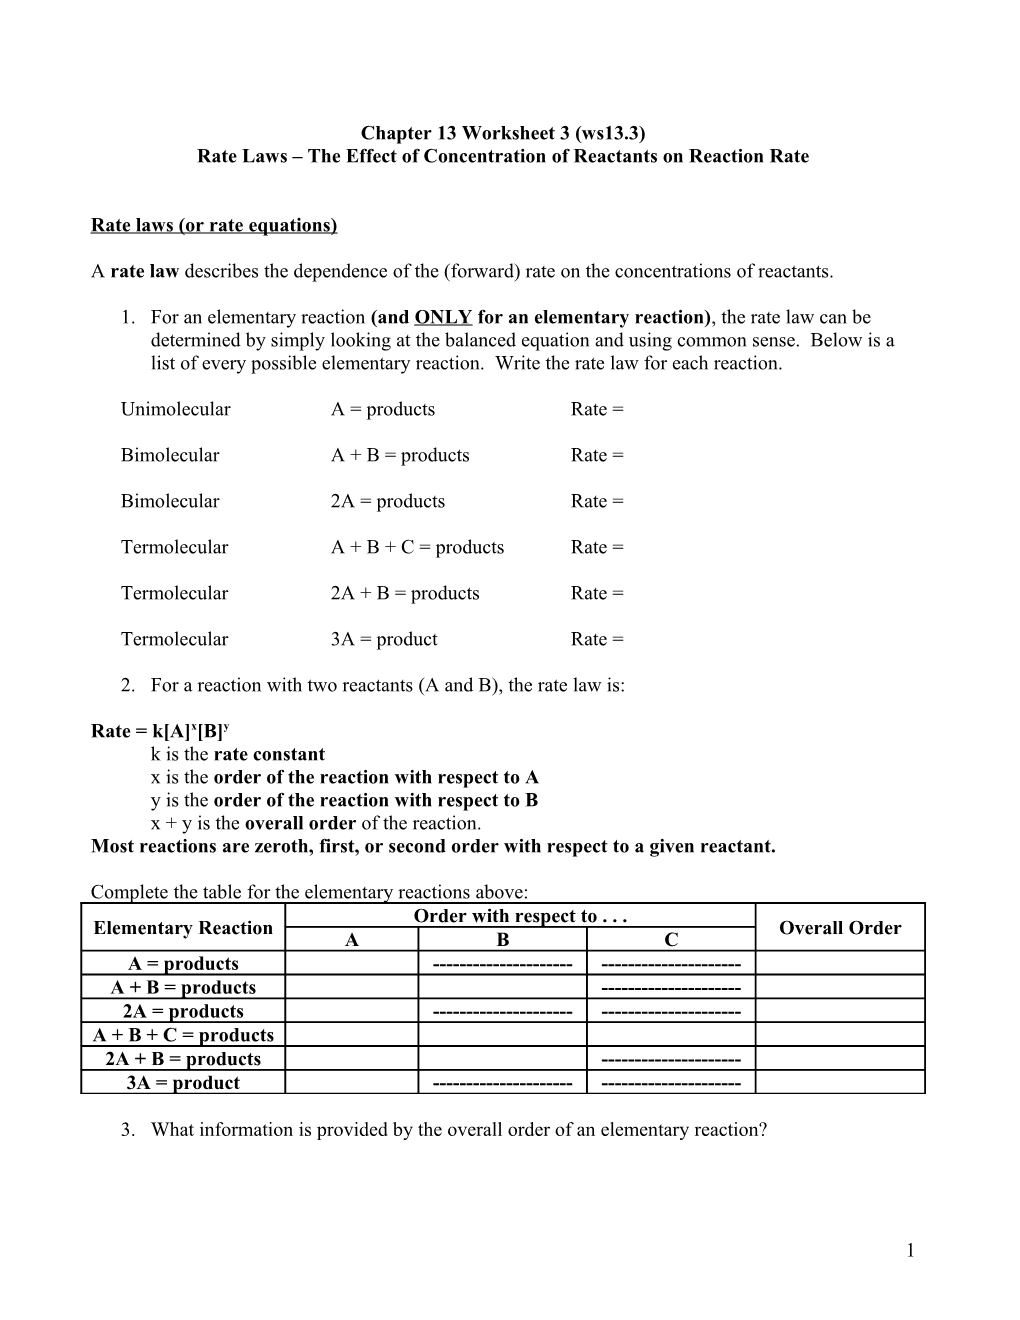 Rate Laws the Effect of Concentration of Reactants on Reaction Rate